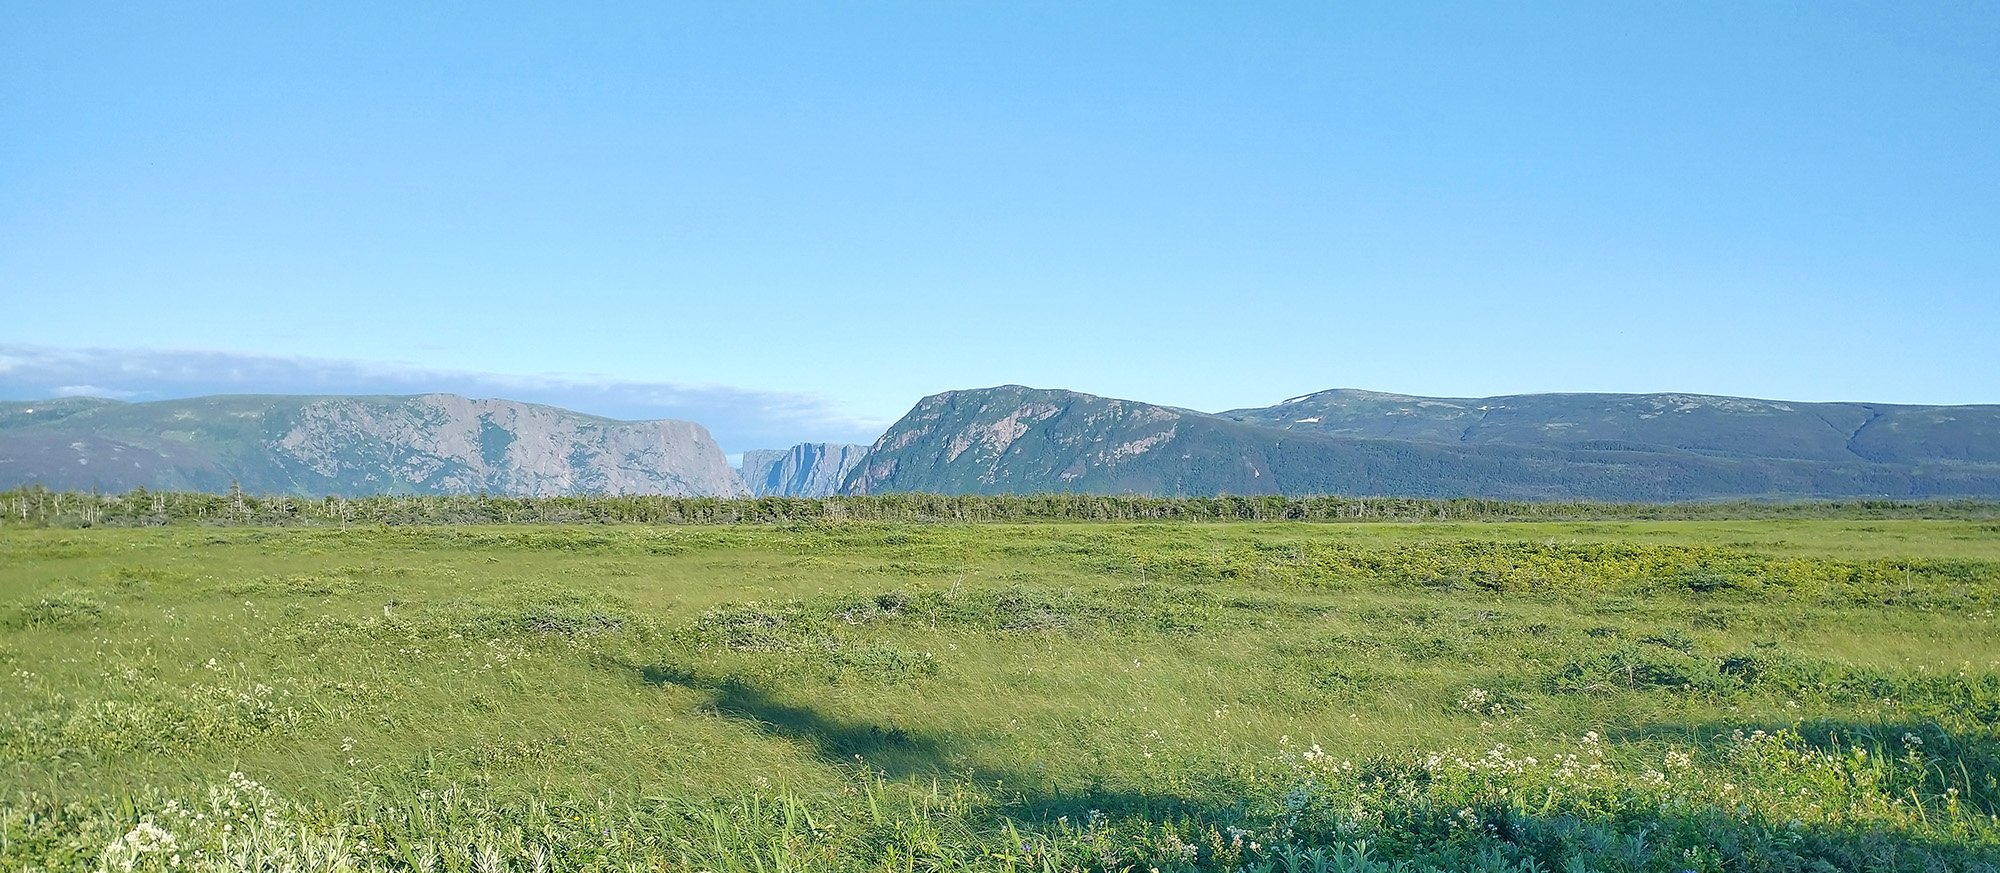 As you keep driving south you're treating to one of the most amazing drives in all of Canada as you drive along the Gros Morne mountain range.